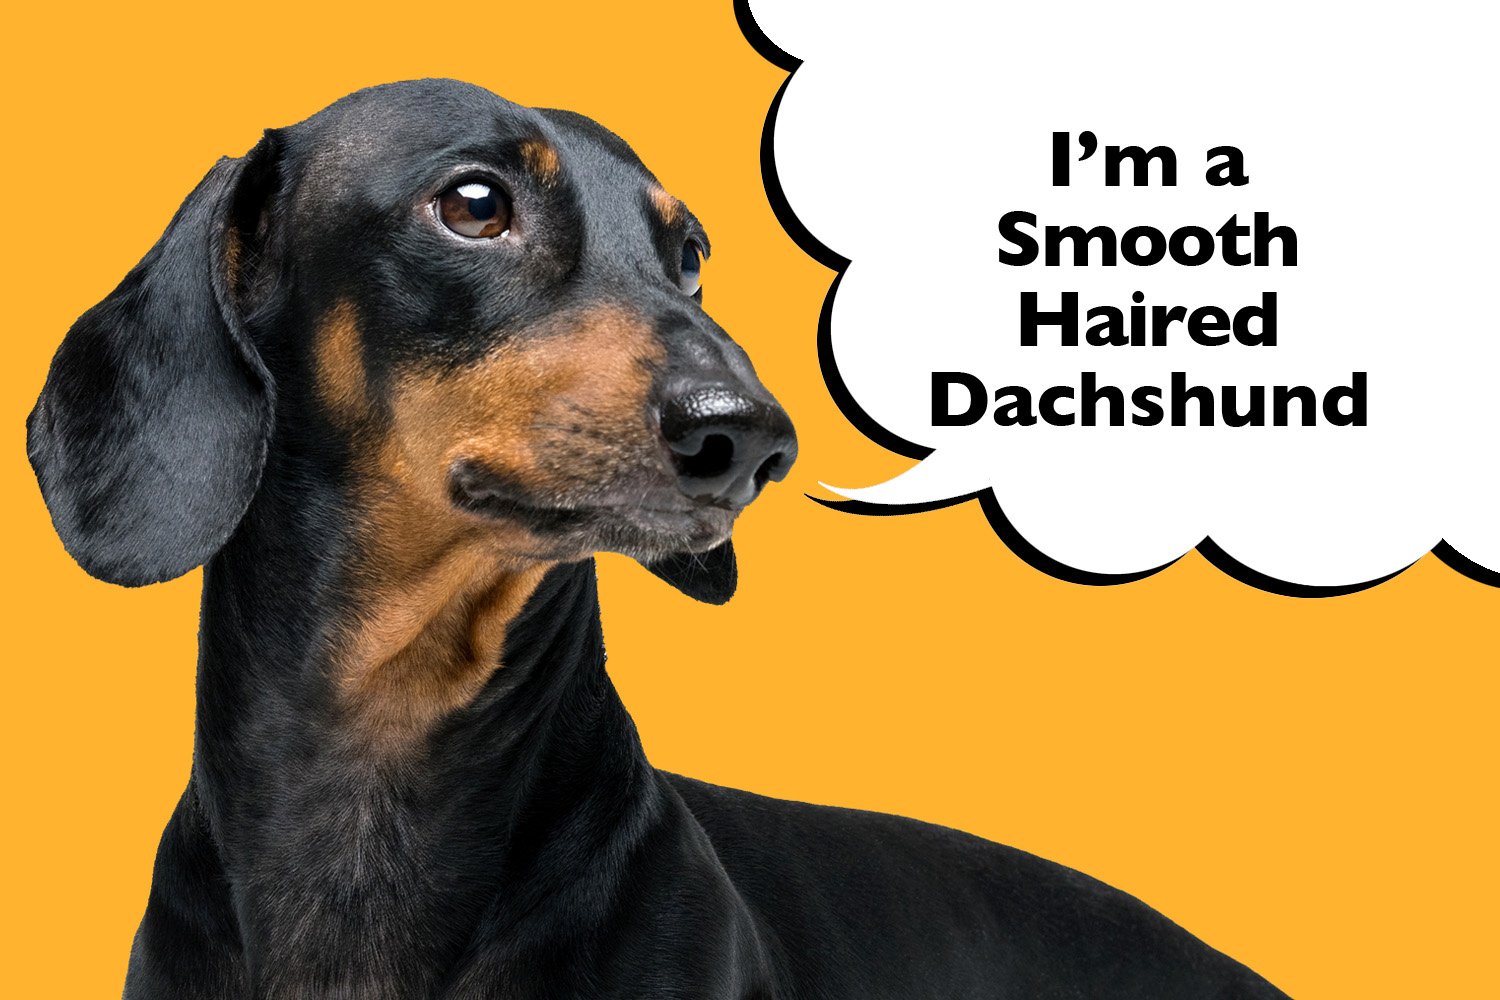 Smooth Haired Dachshund - Complete Guide To The Breed - I Love Dachshunds